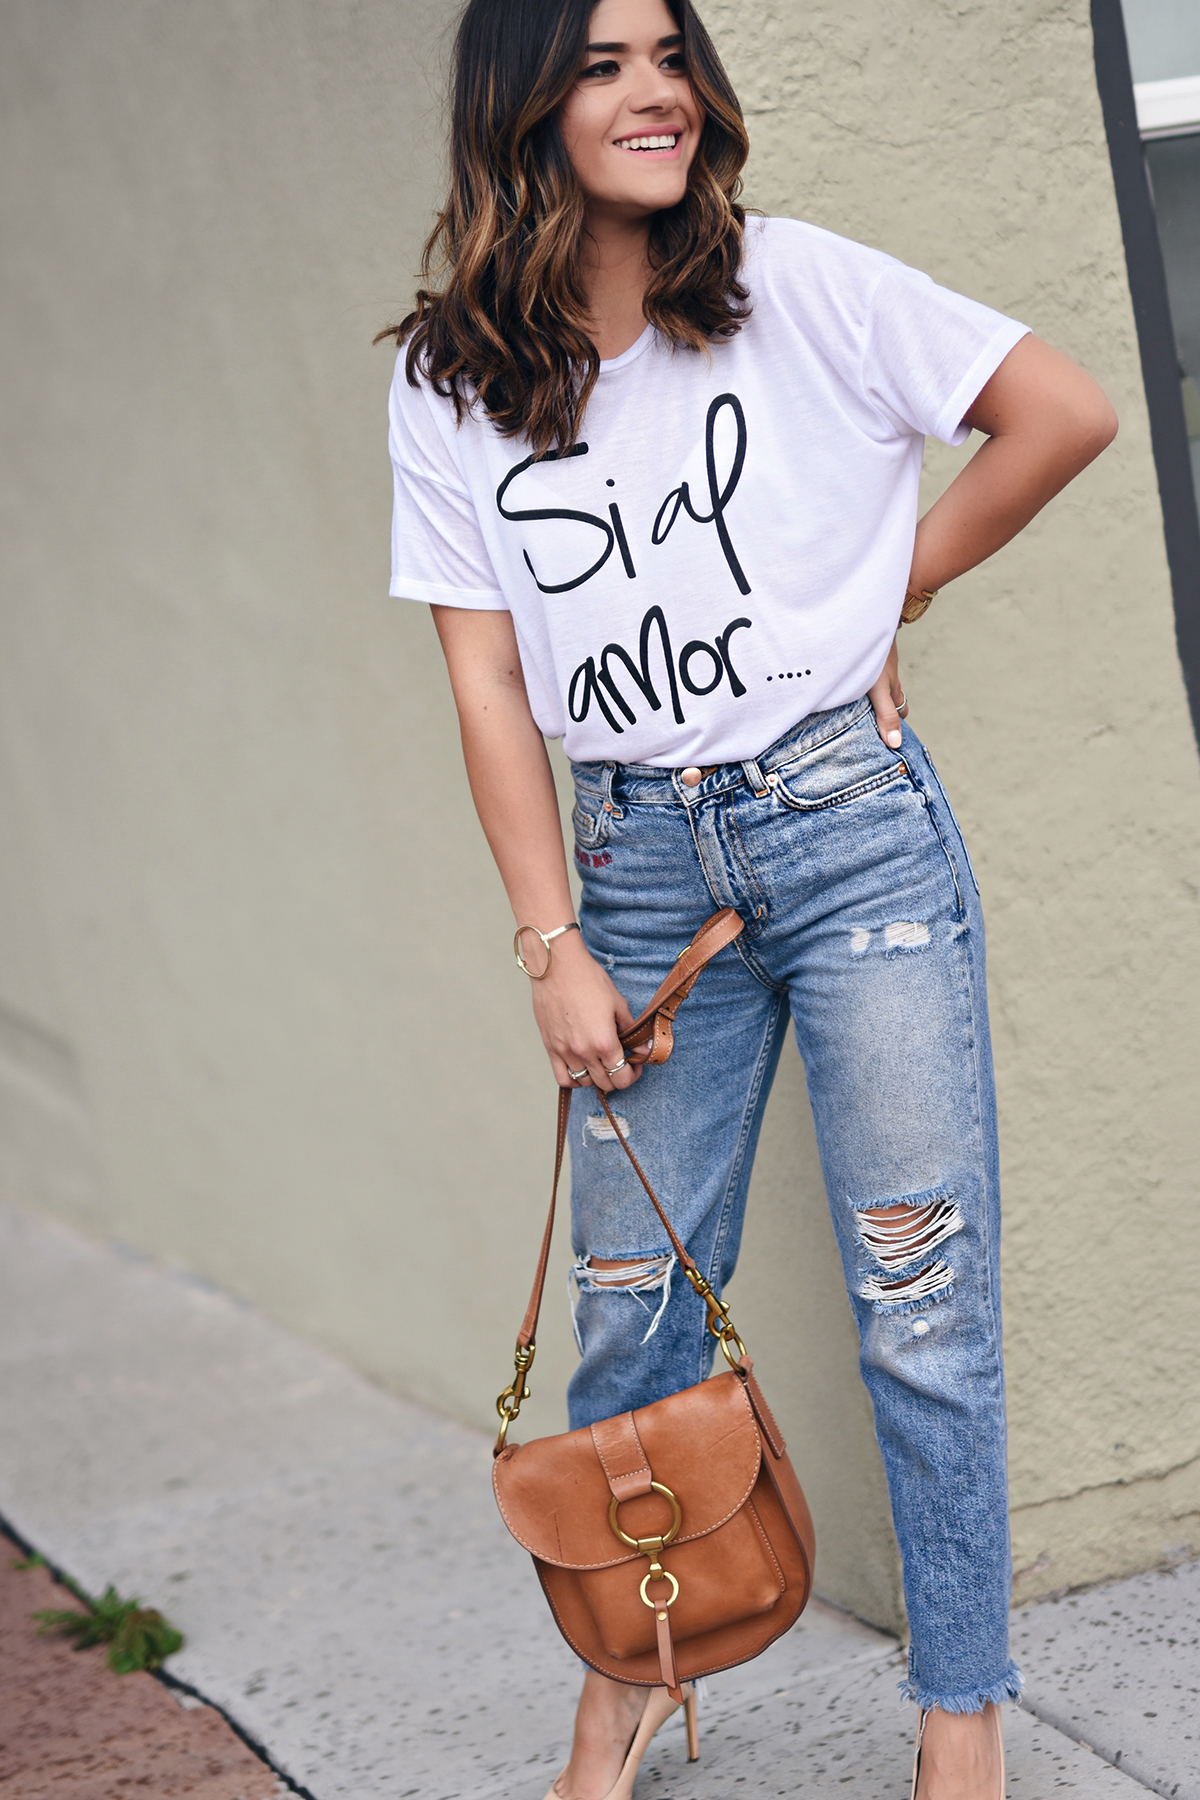 Carolina Hellal of Chic Talk wearing a t-shirt from the Si al amor t-shirt collection by Chic Talk. 